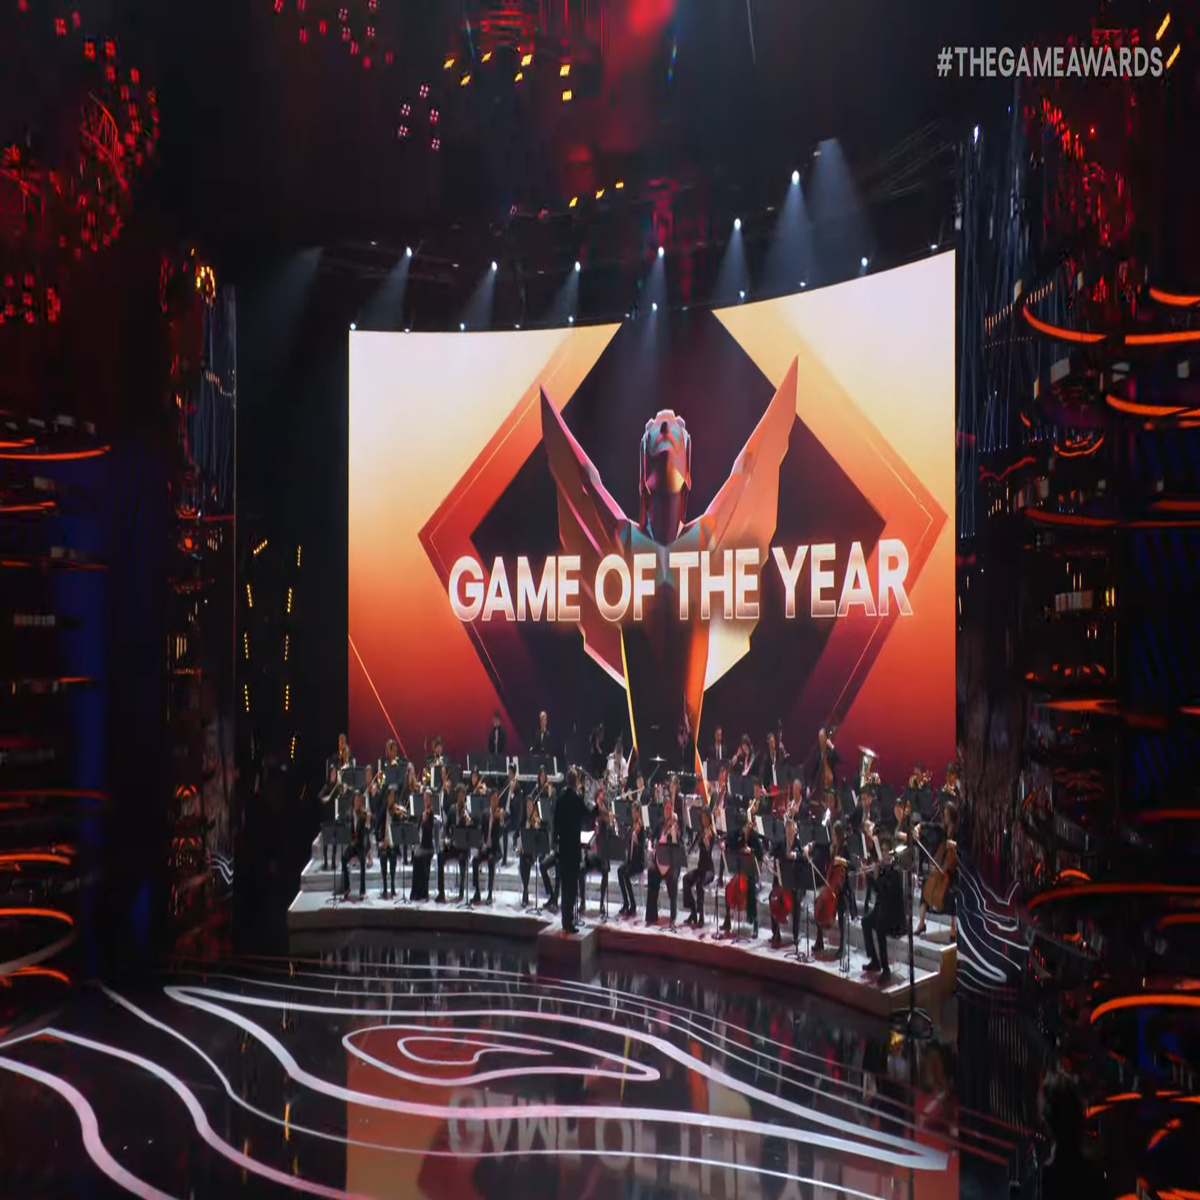 How to Watch the 2023 Game Awards Live Free Online